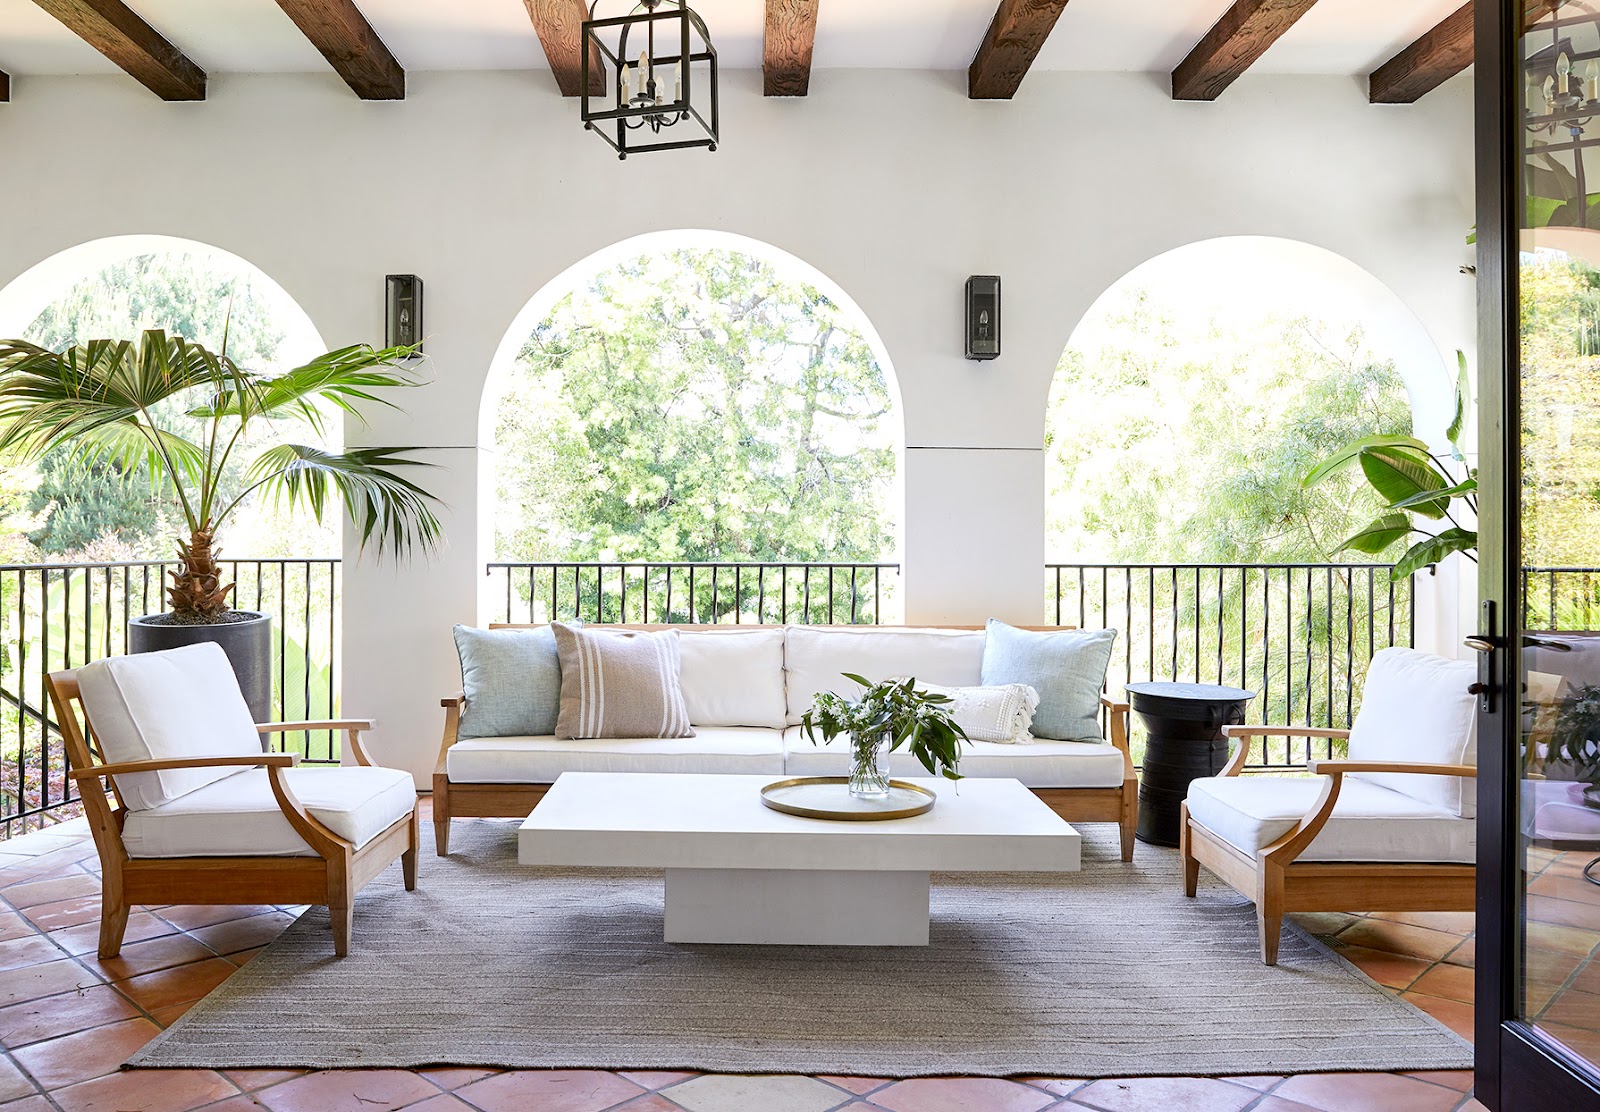 How To Aesthetics Your Outdoor Living Space